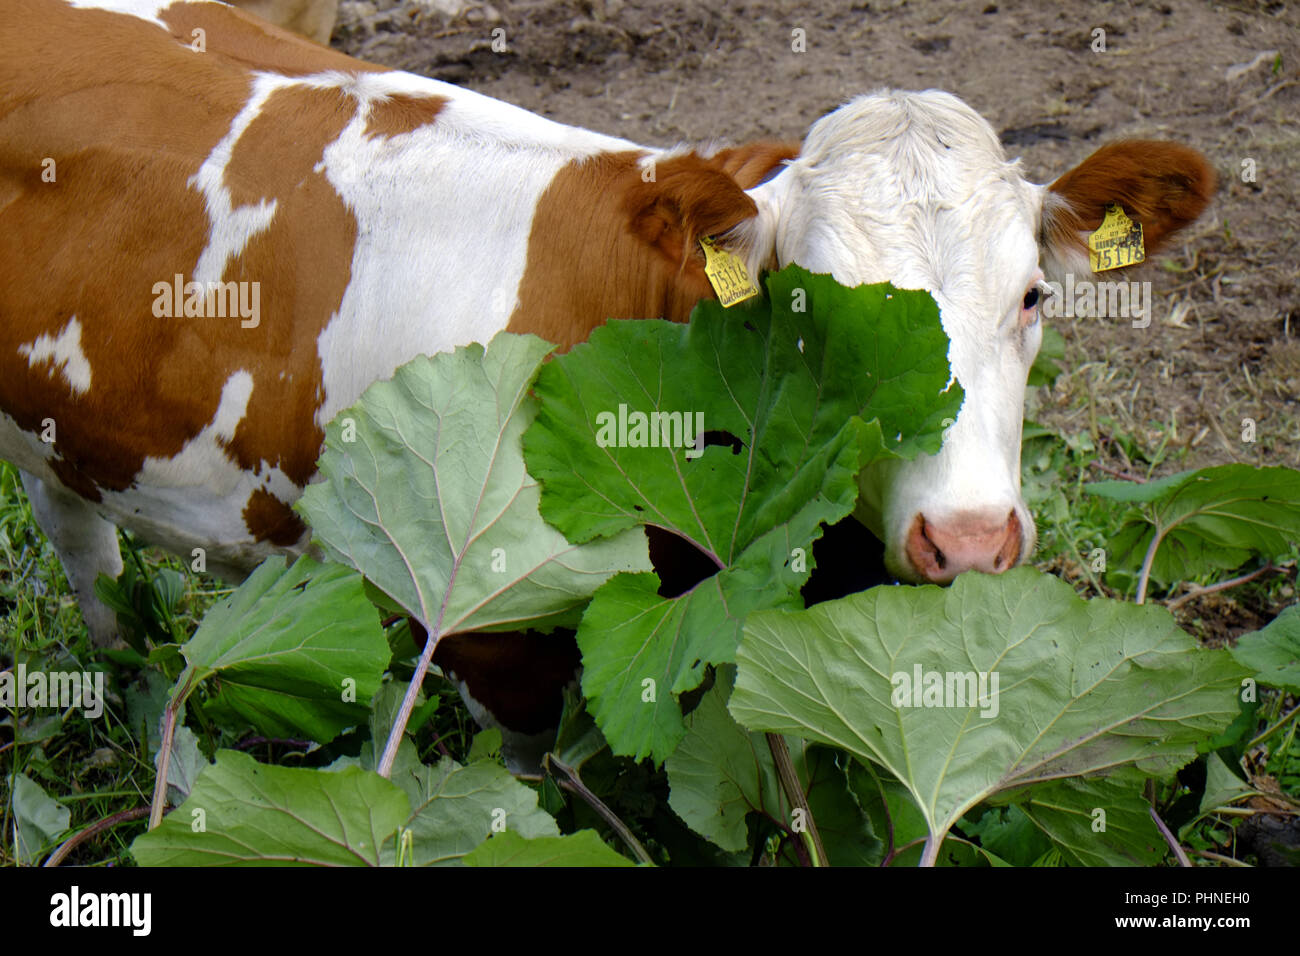 Brown-white spotted cattle plays hide-and-seek Stock Photo